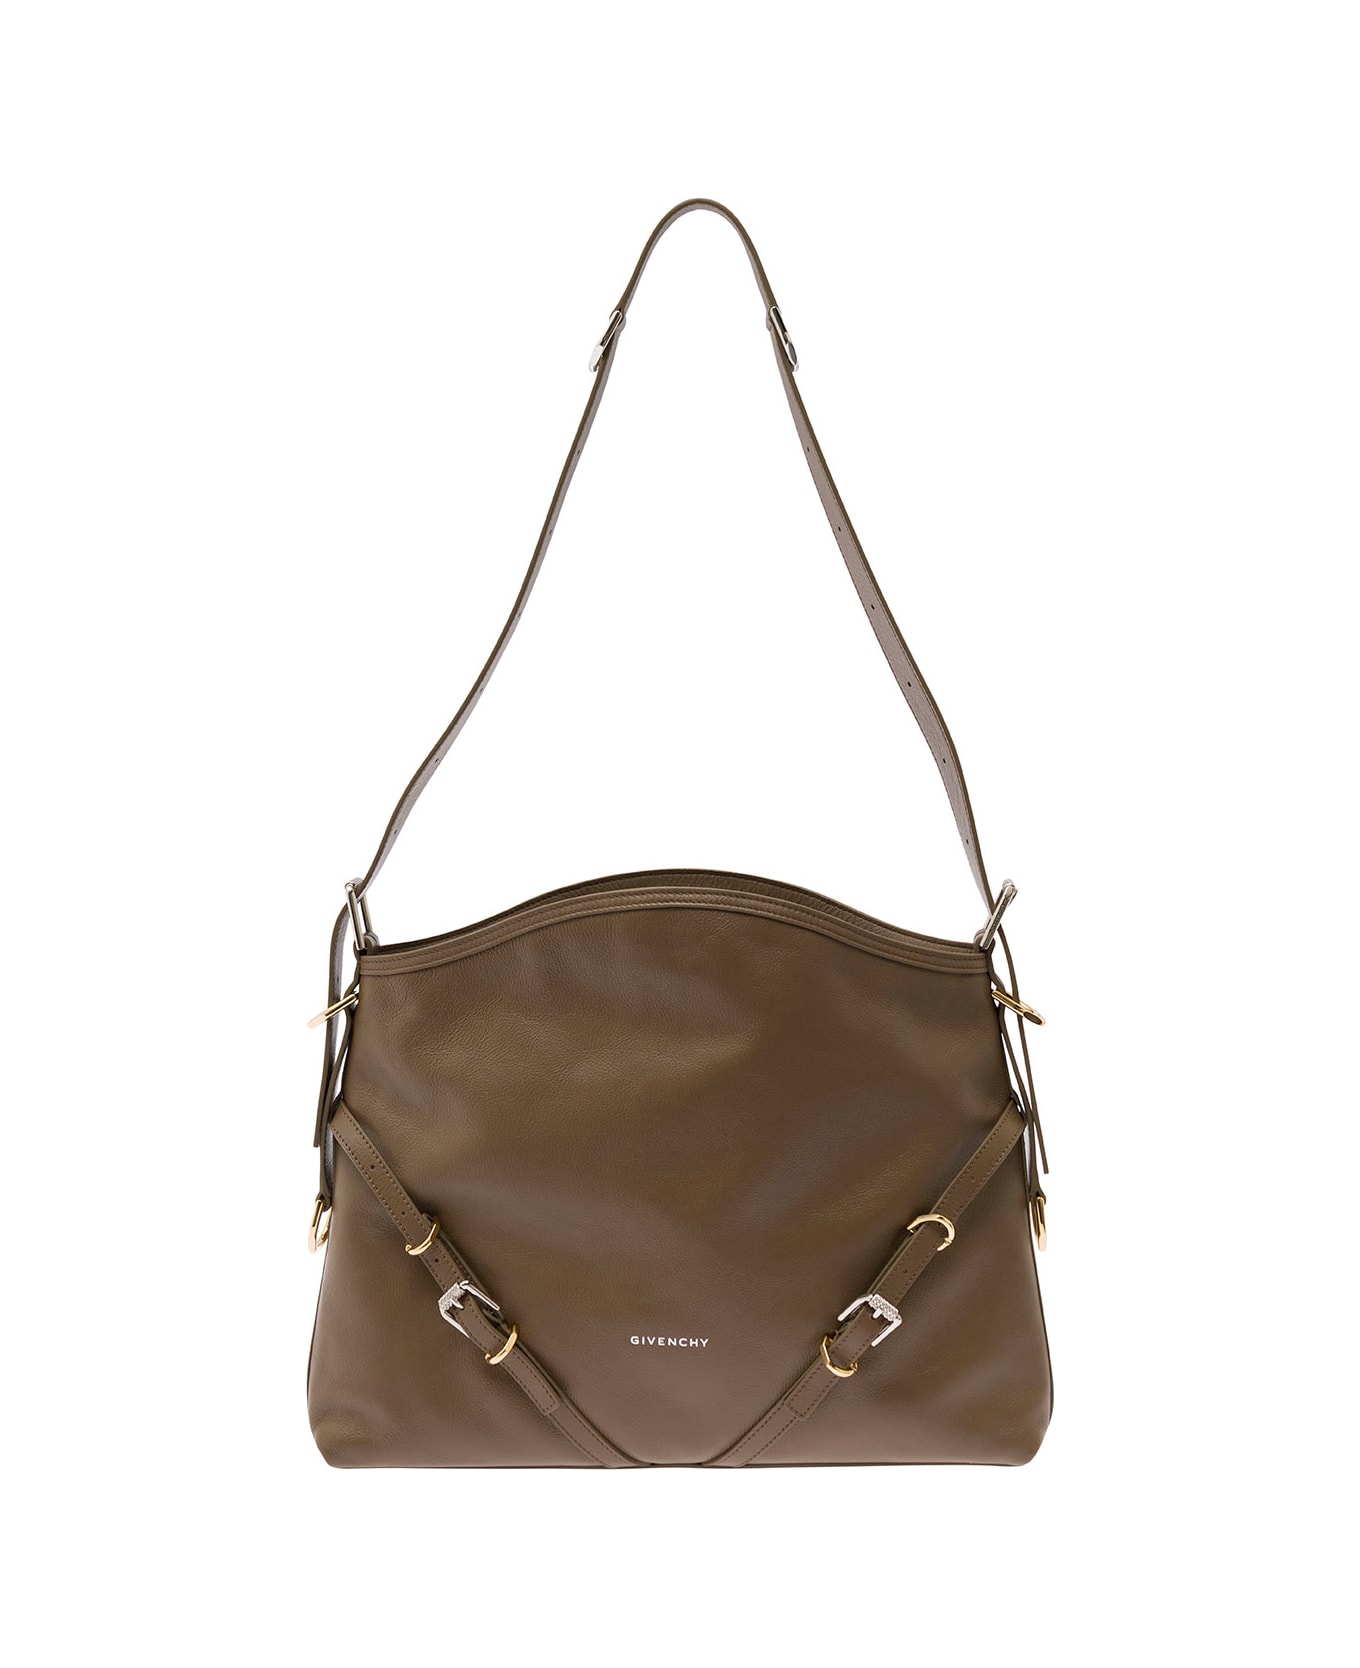 Givenchy 'voyou' Brown Shoulder Bag With Embossed Logo In Smooth Leather Woman - Beige